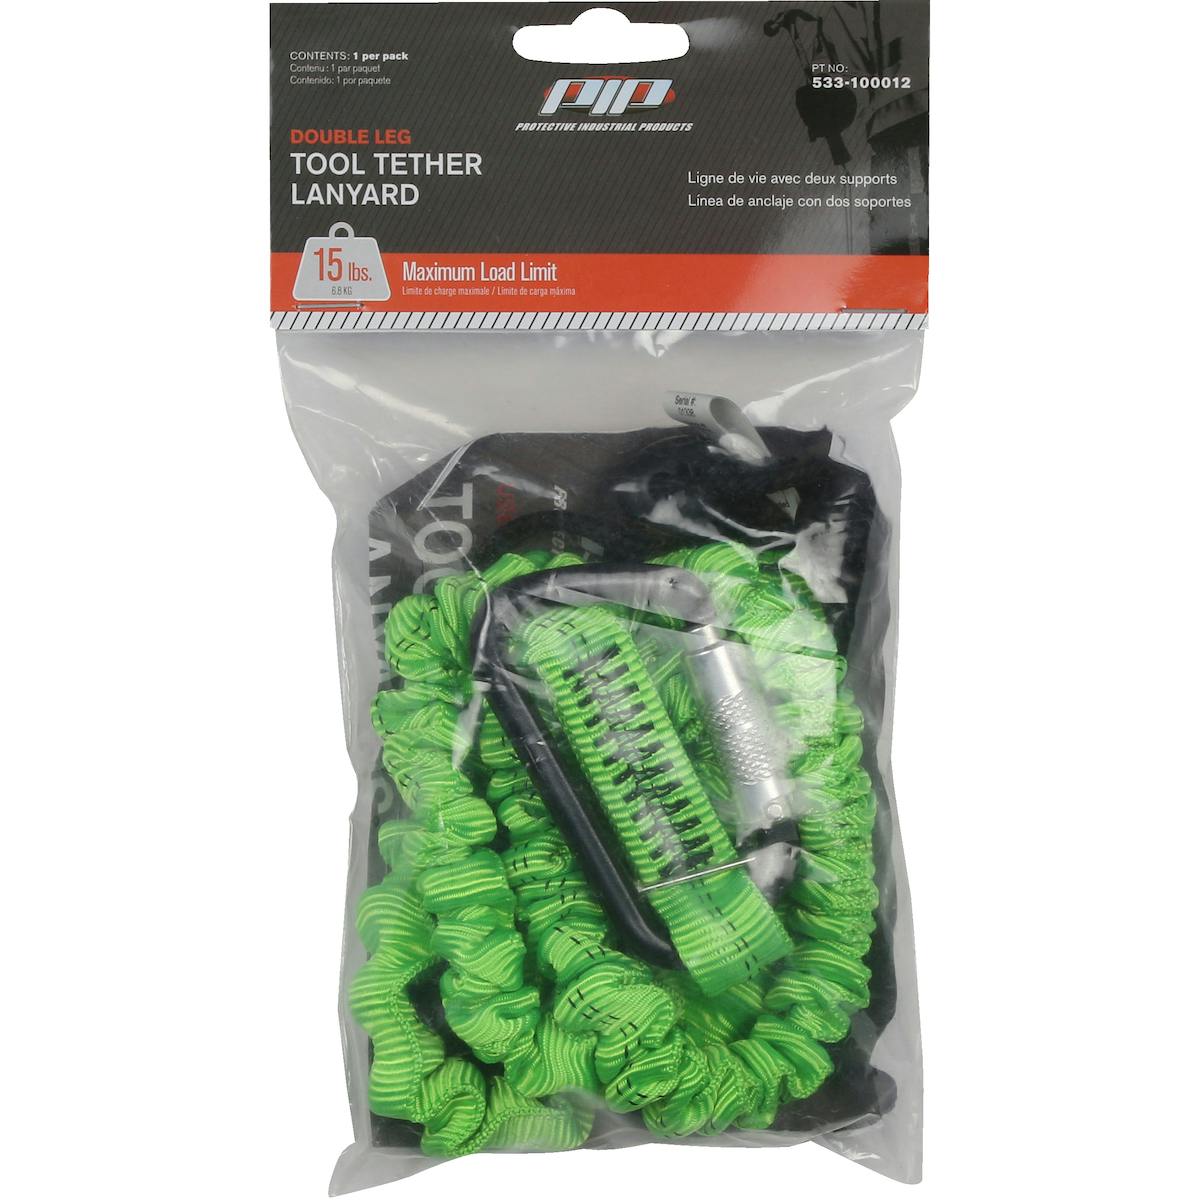 Double Leg Tool Tethering Lanyard - 10 lbs. maximum load limit - Retail Packaged, Green (533-100012) - OS_0